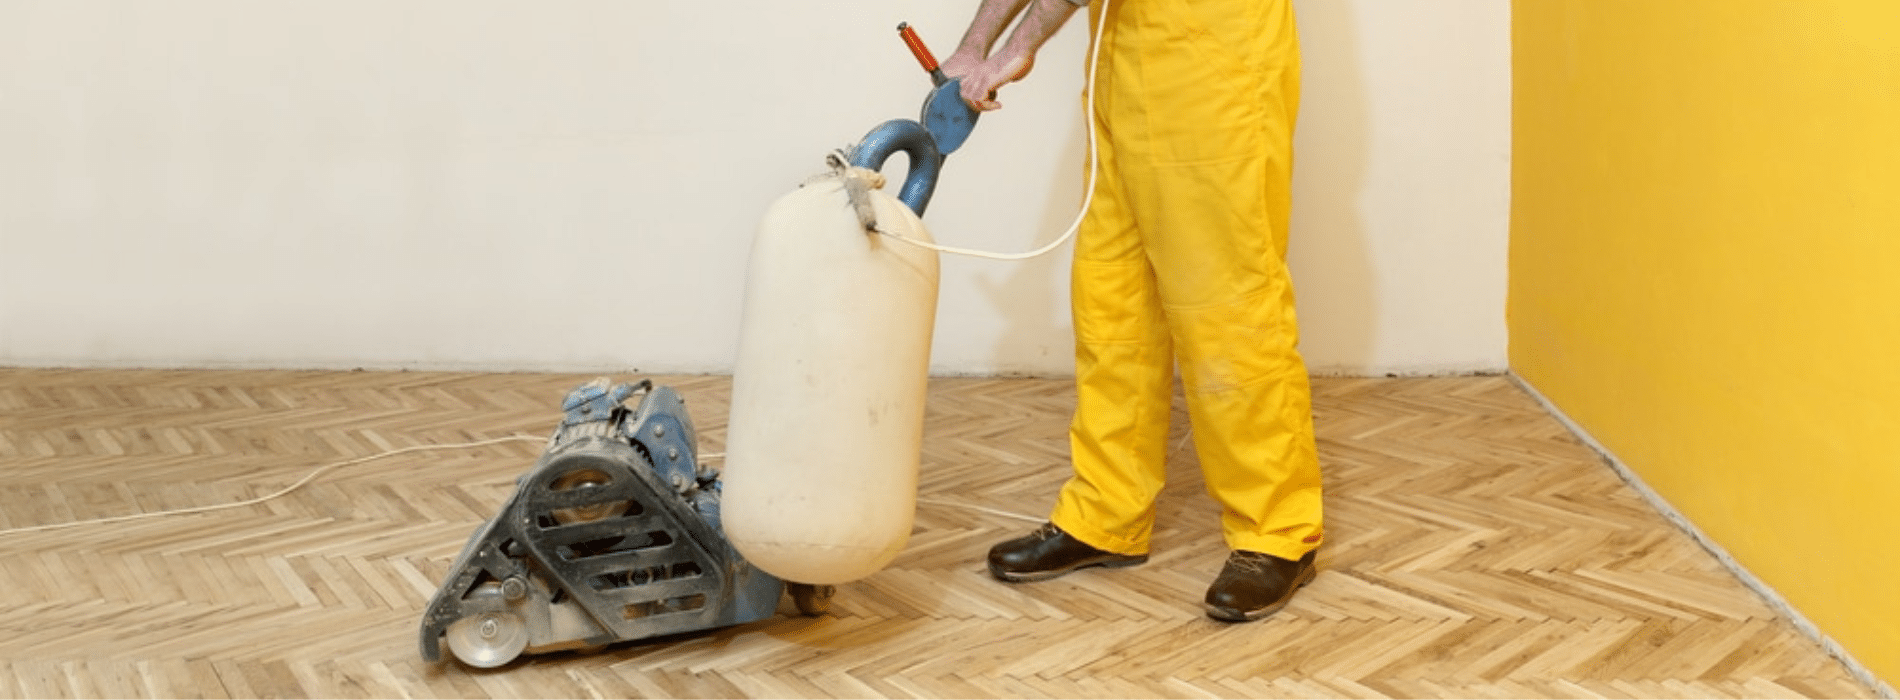 In Finchley Church End, N3, Experience the expertise of Mr Sander® as they skillfully sand a herringbone floor using the powerful 200x750 mm Bona belt sander. Connected to a dust extraction system with a HEPA filter, cleanliness and efficiency are guaranteed. 